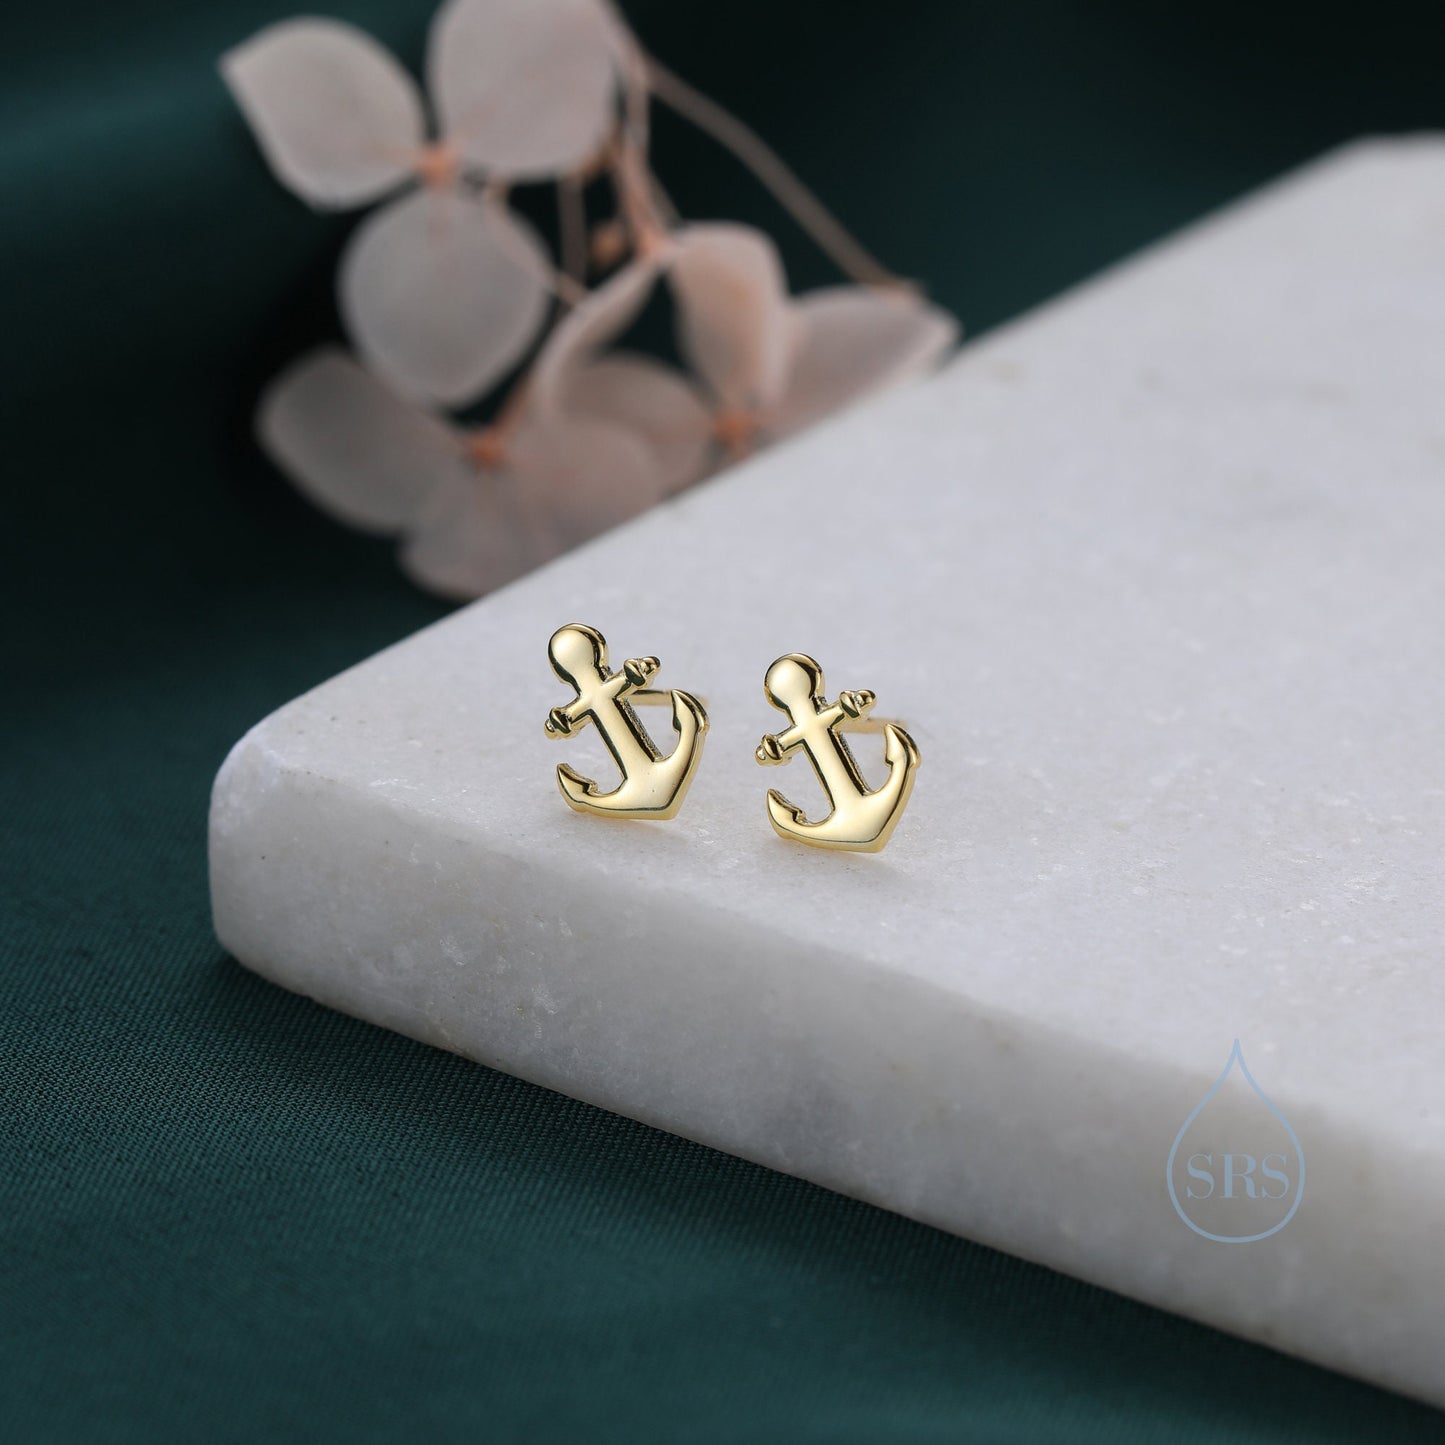 Anchor Stud Earrings in Sterling Silver, Silver or Gold, Tiny Anchor Earrings, Nautical Ocean Theme Earrings